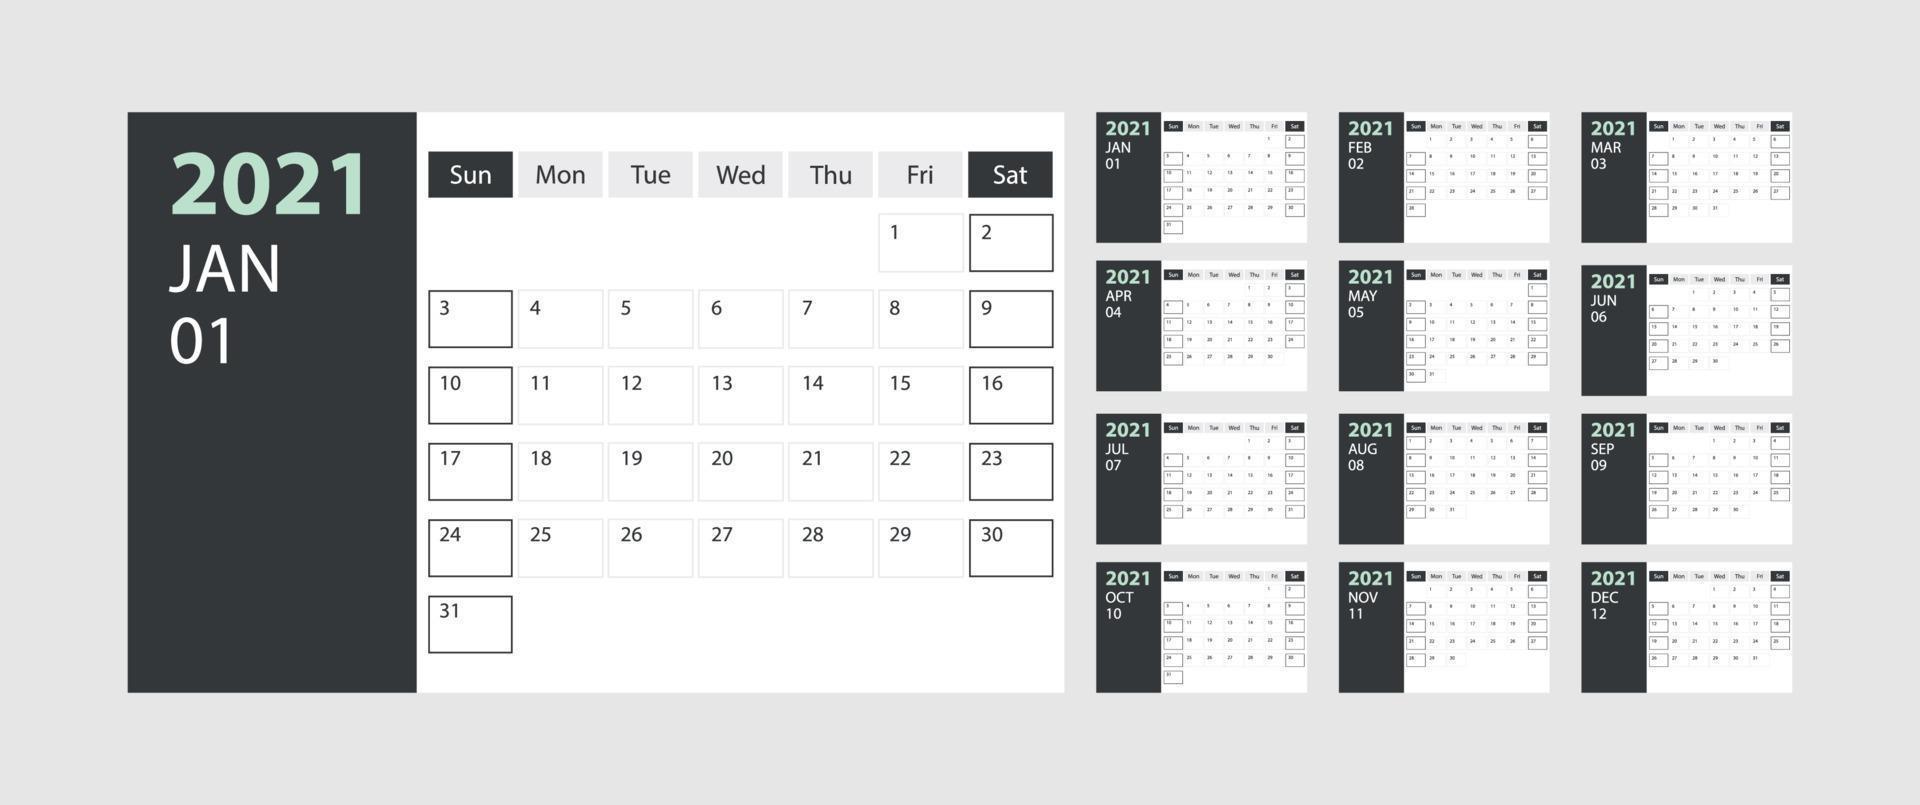 Calendar 2021 week start Sunday corporate design planner template with green and gray theme vector